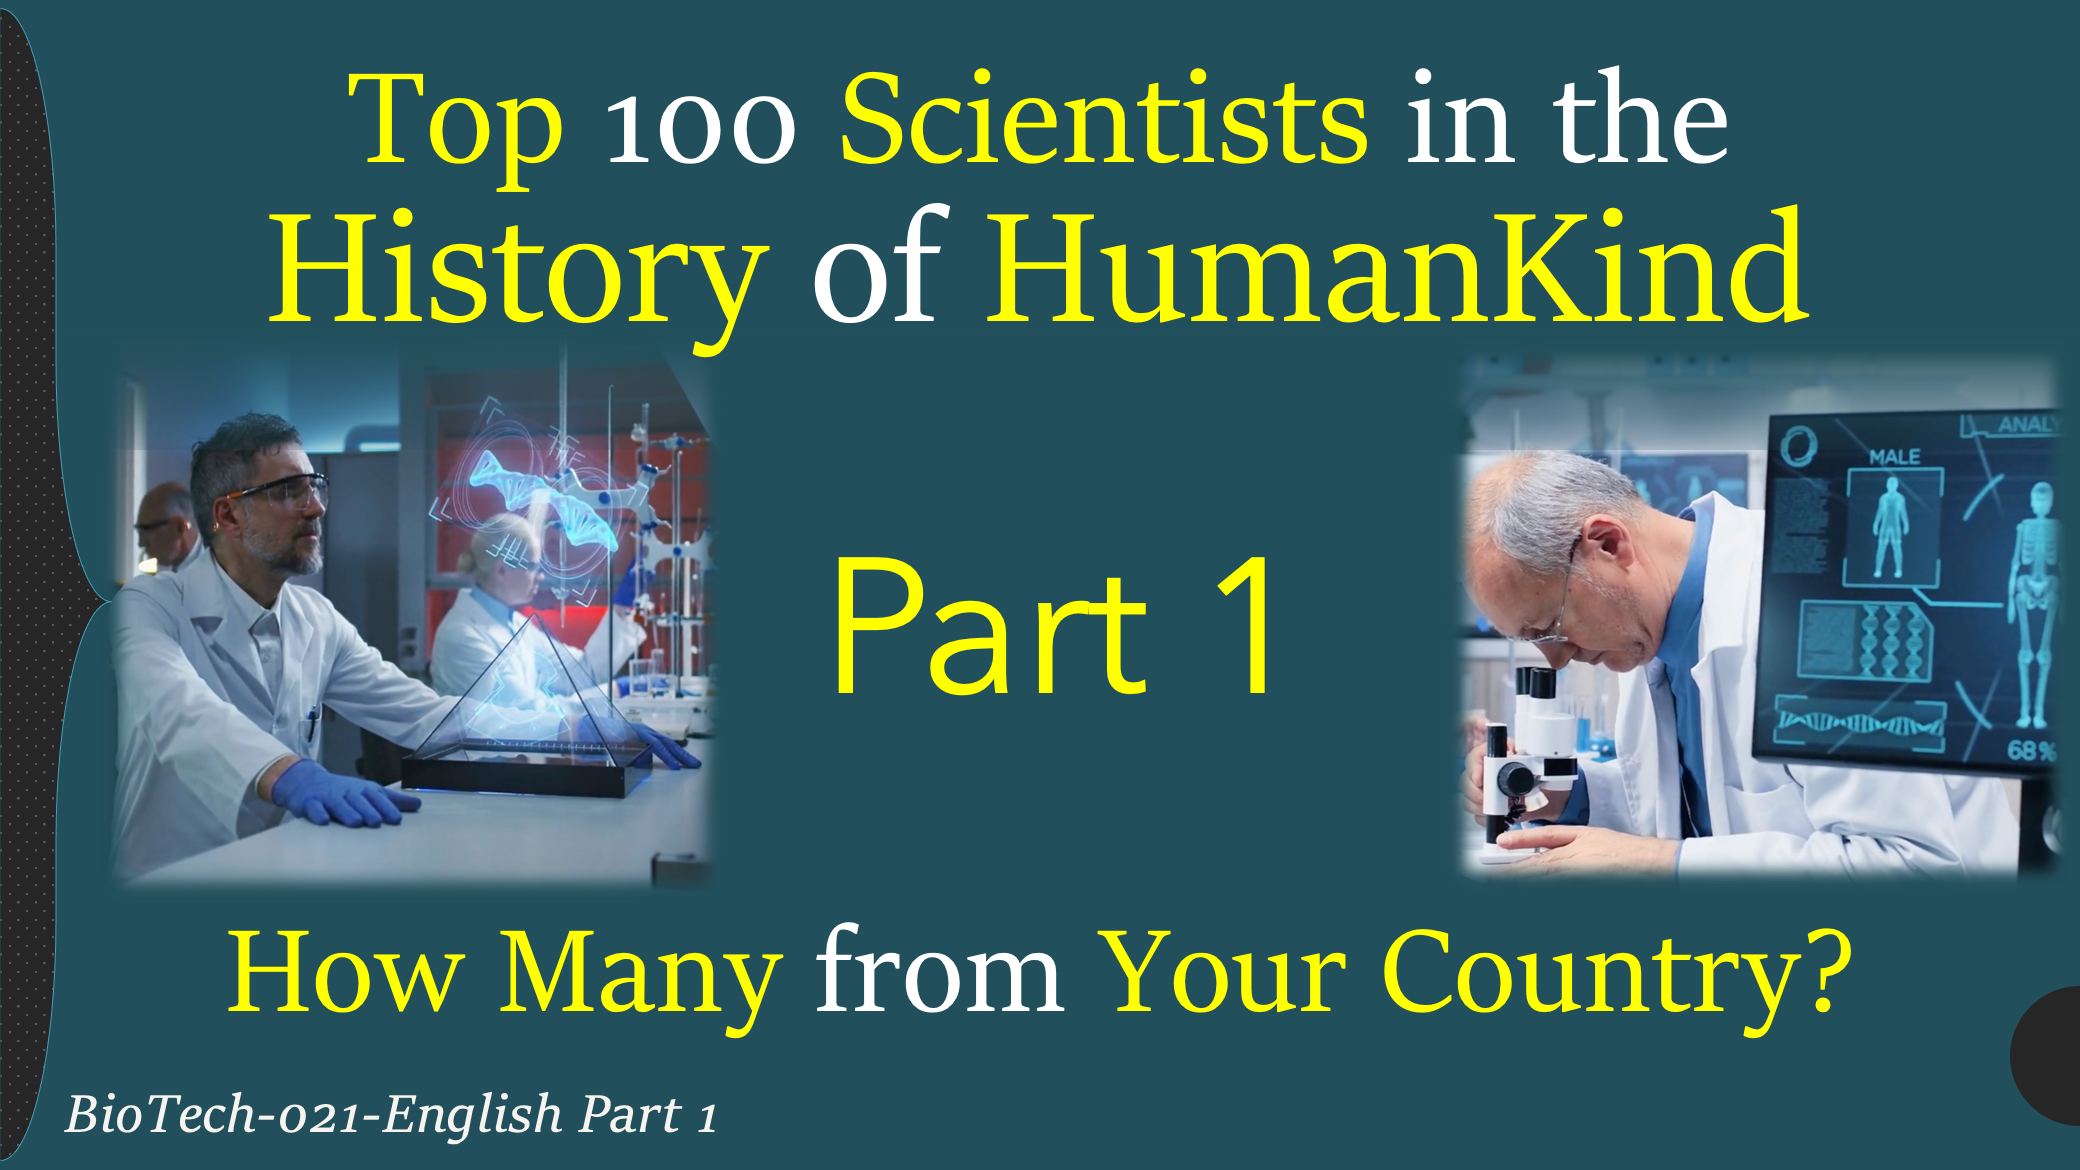 Top 100 Scientists in the History of Humankind (Part 1)